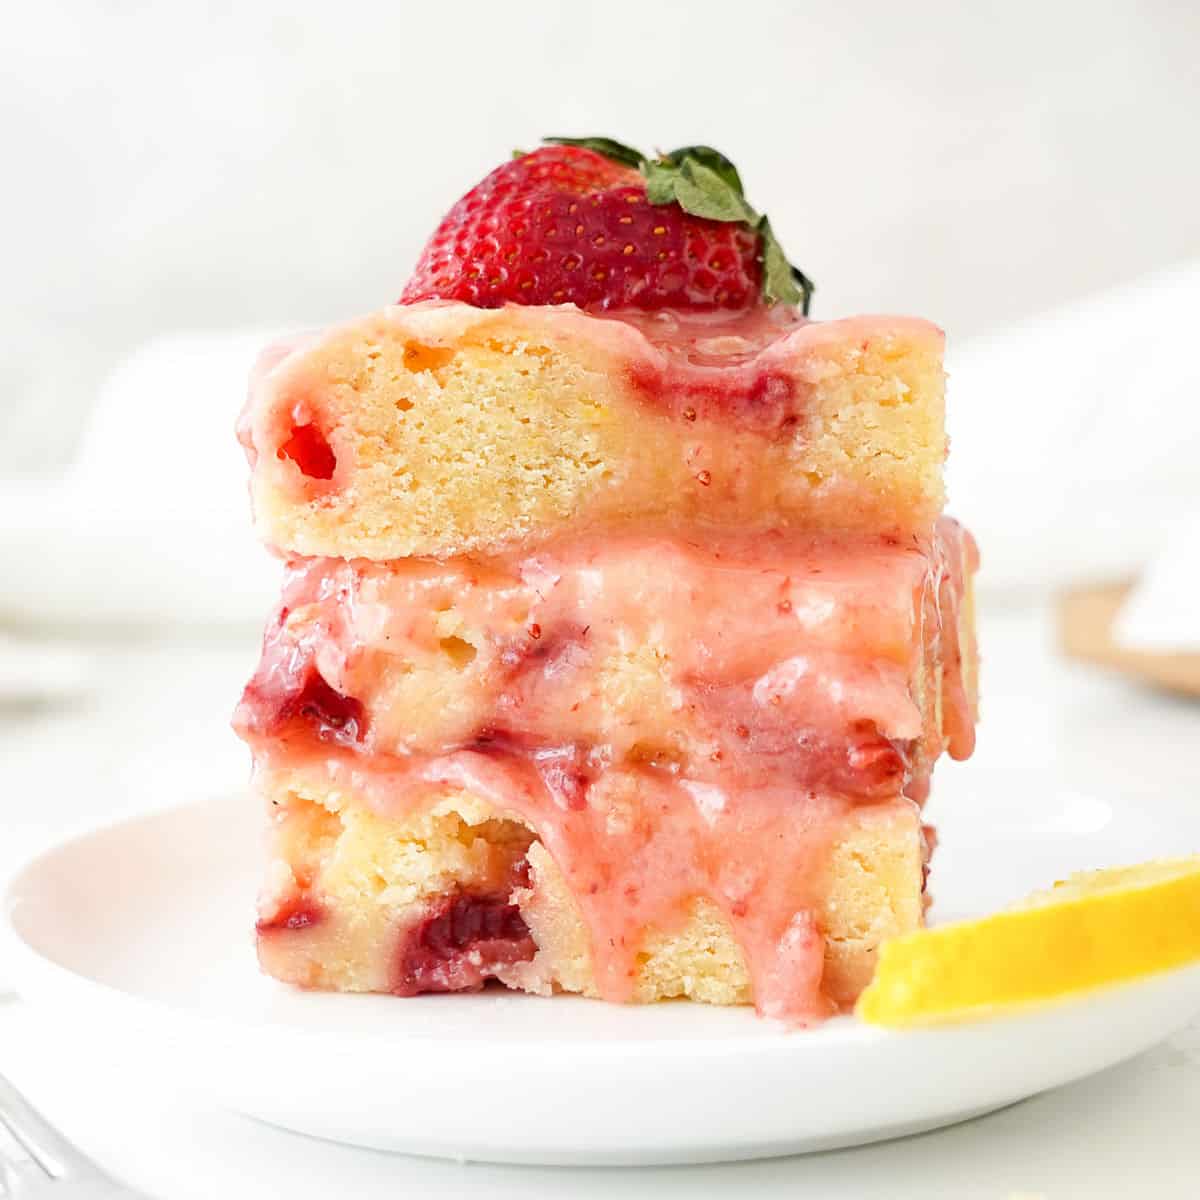 Stack of three glazed strawberry blondies on a white plate. Grey and white background.